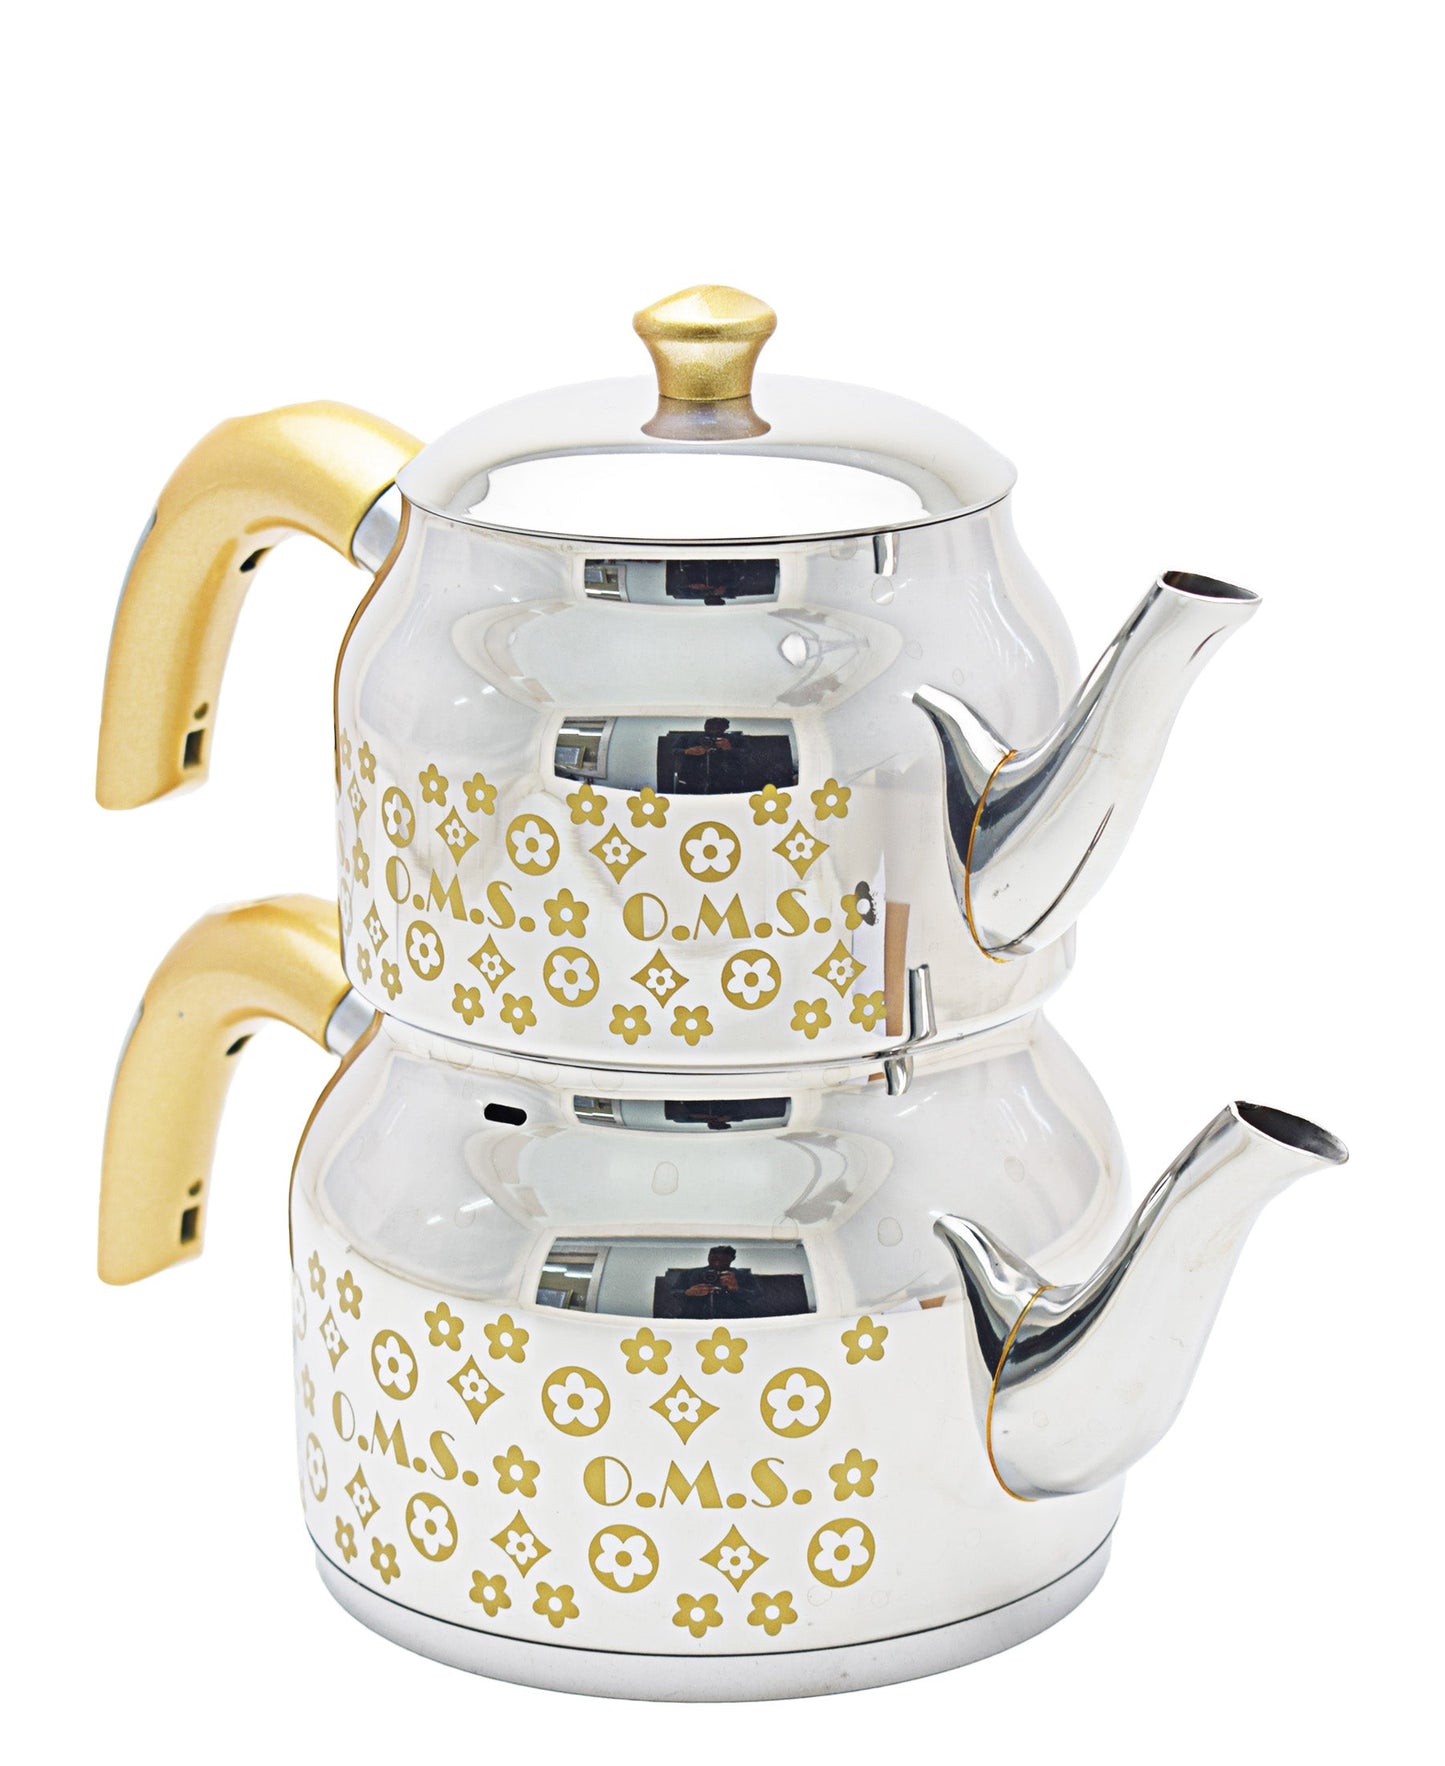 OMS Stainless Steel Tea Pot - Silver & Gold